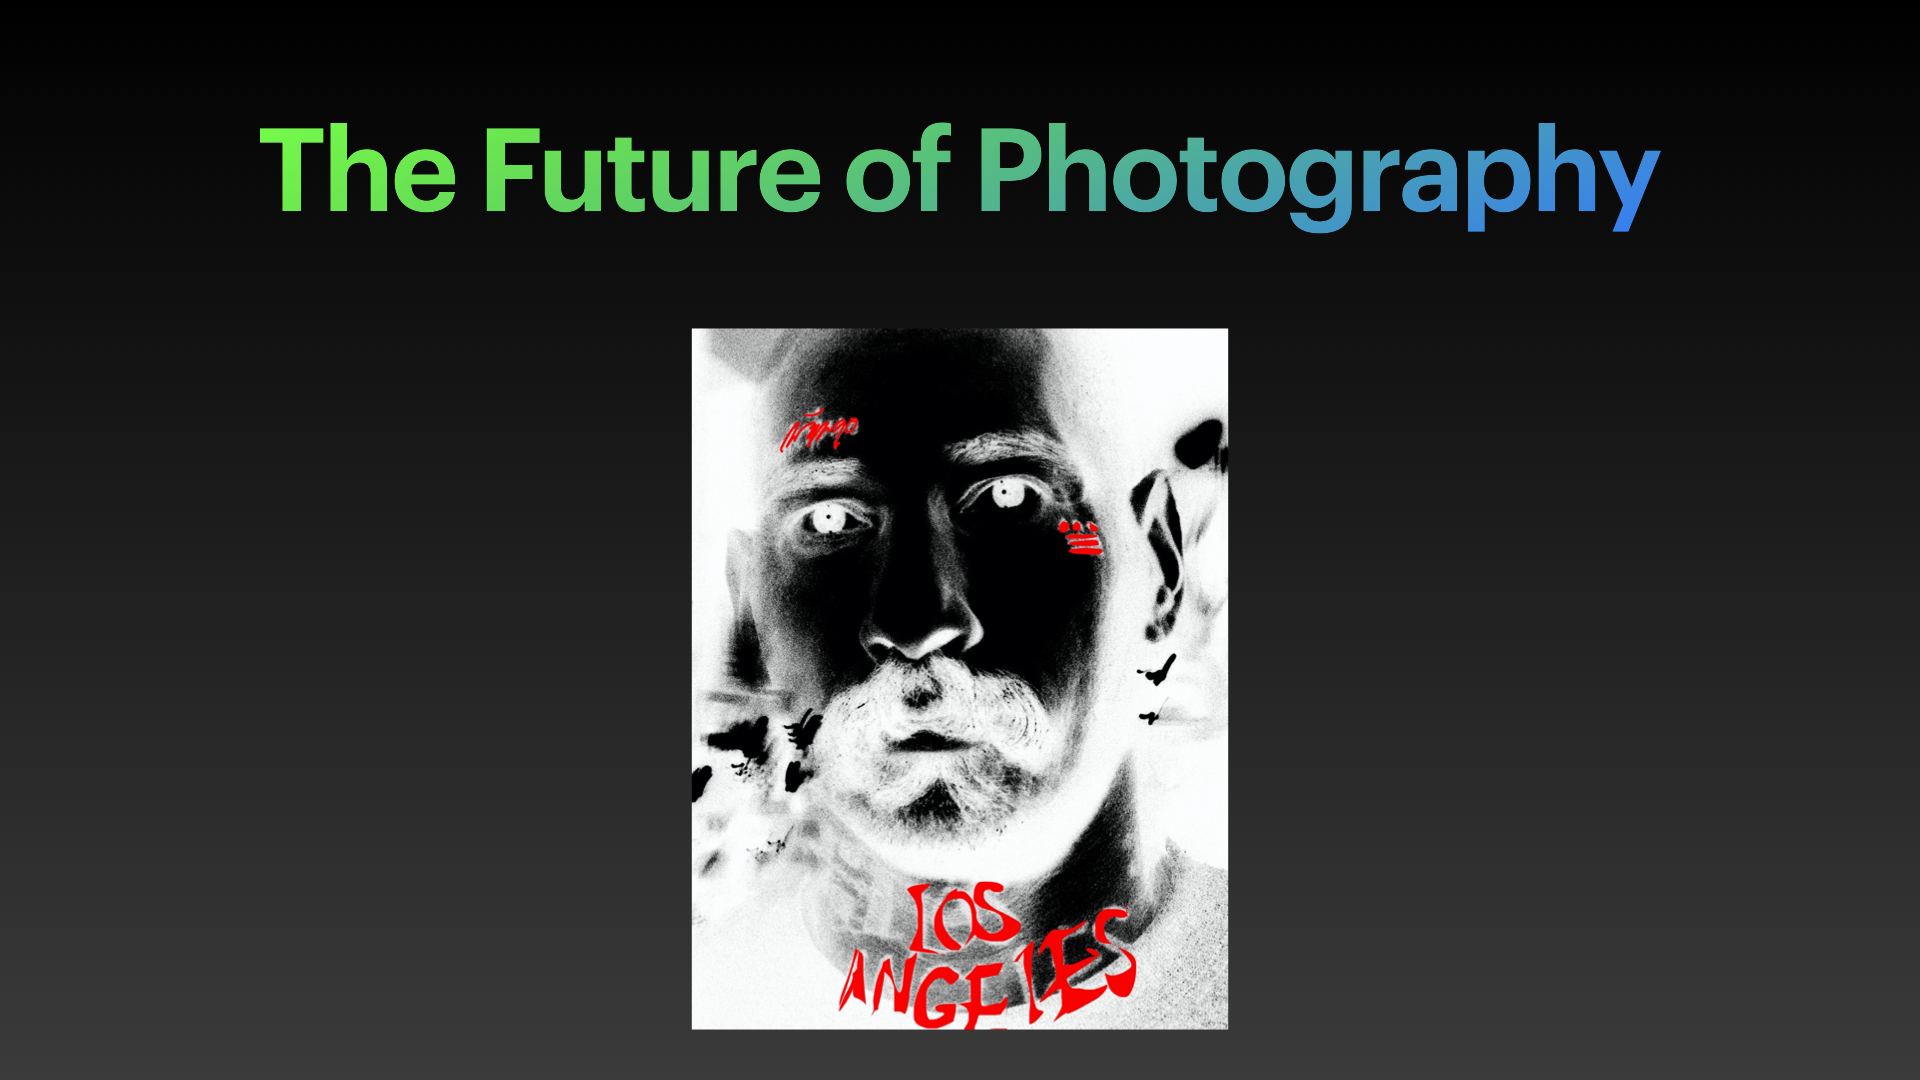 The future of photography